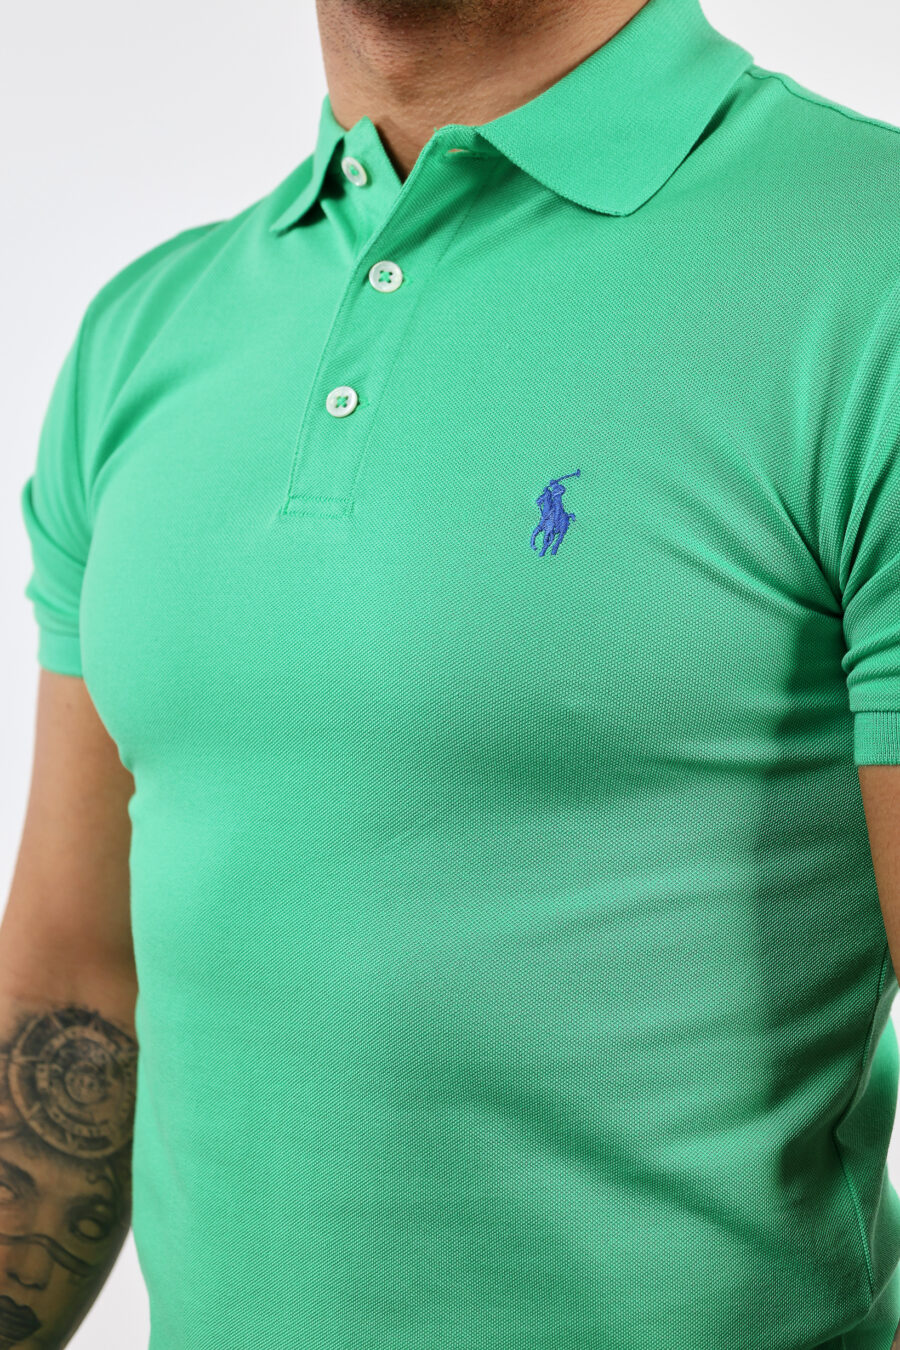 Green and blue T-shirt with mini-logo "polo" - BLS Fashion 174